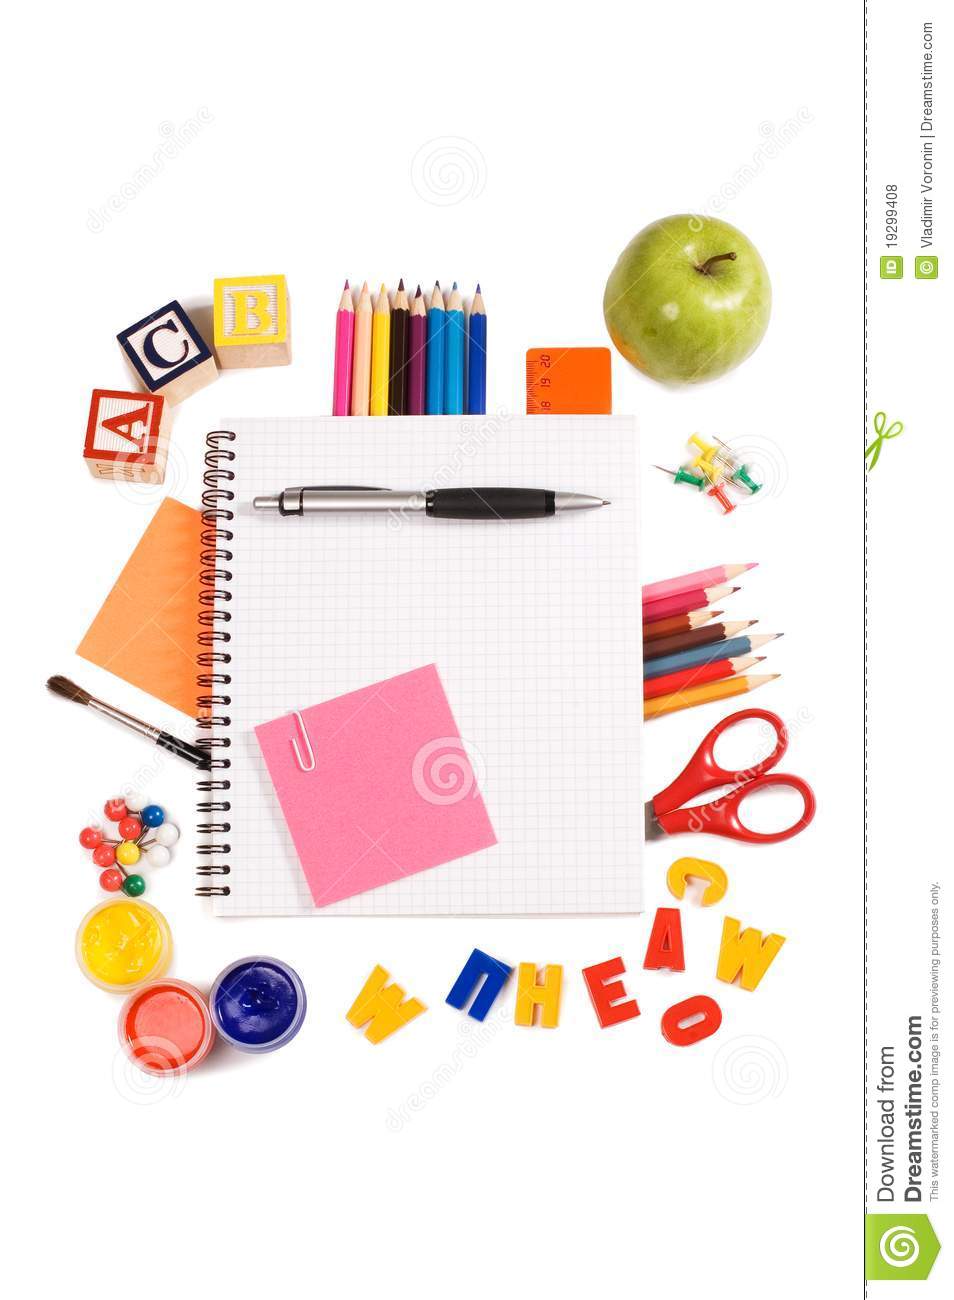 Pencils And Apple   Concept School Royalty Free Stock Photos   Image    